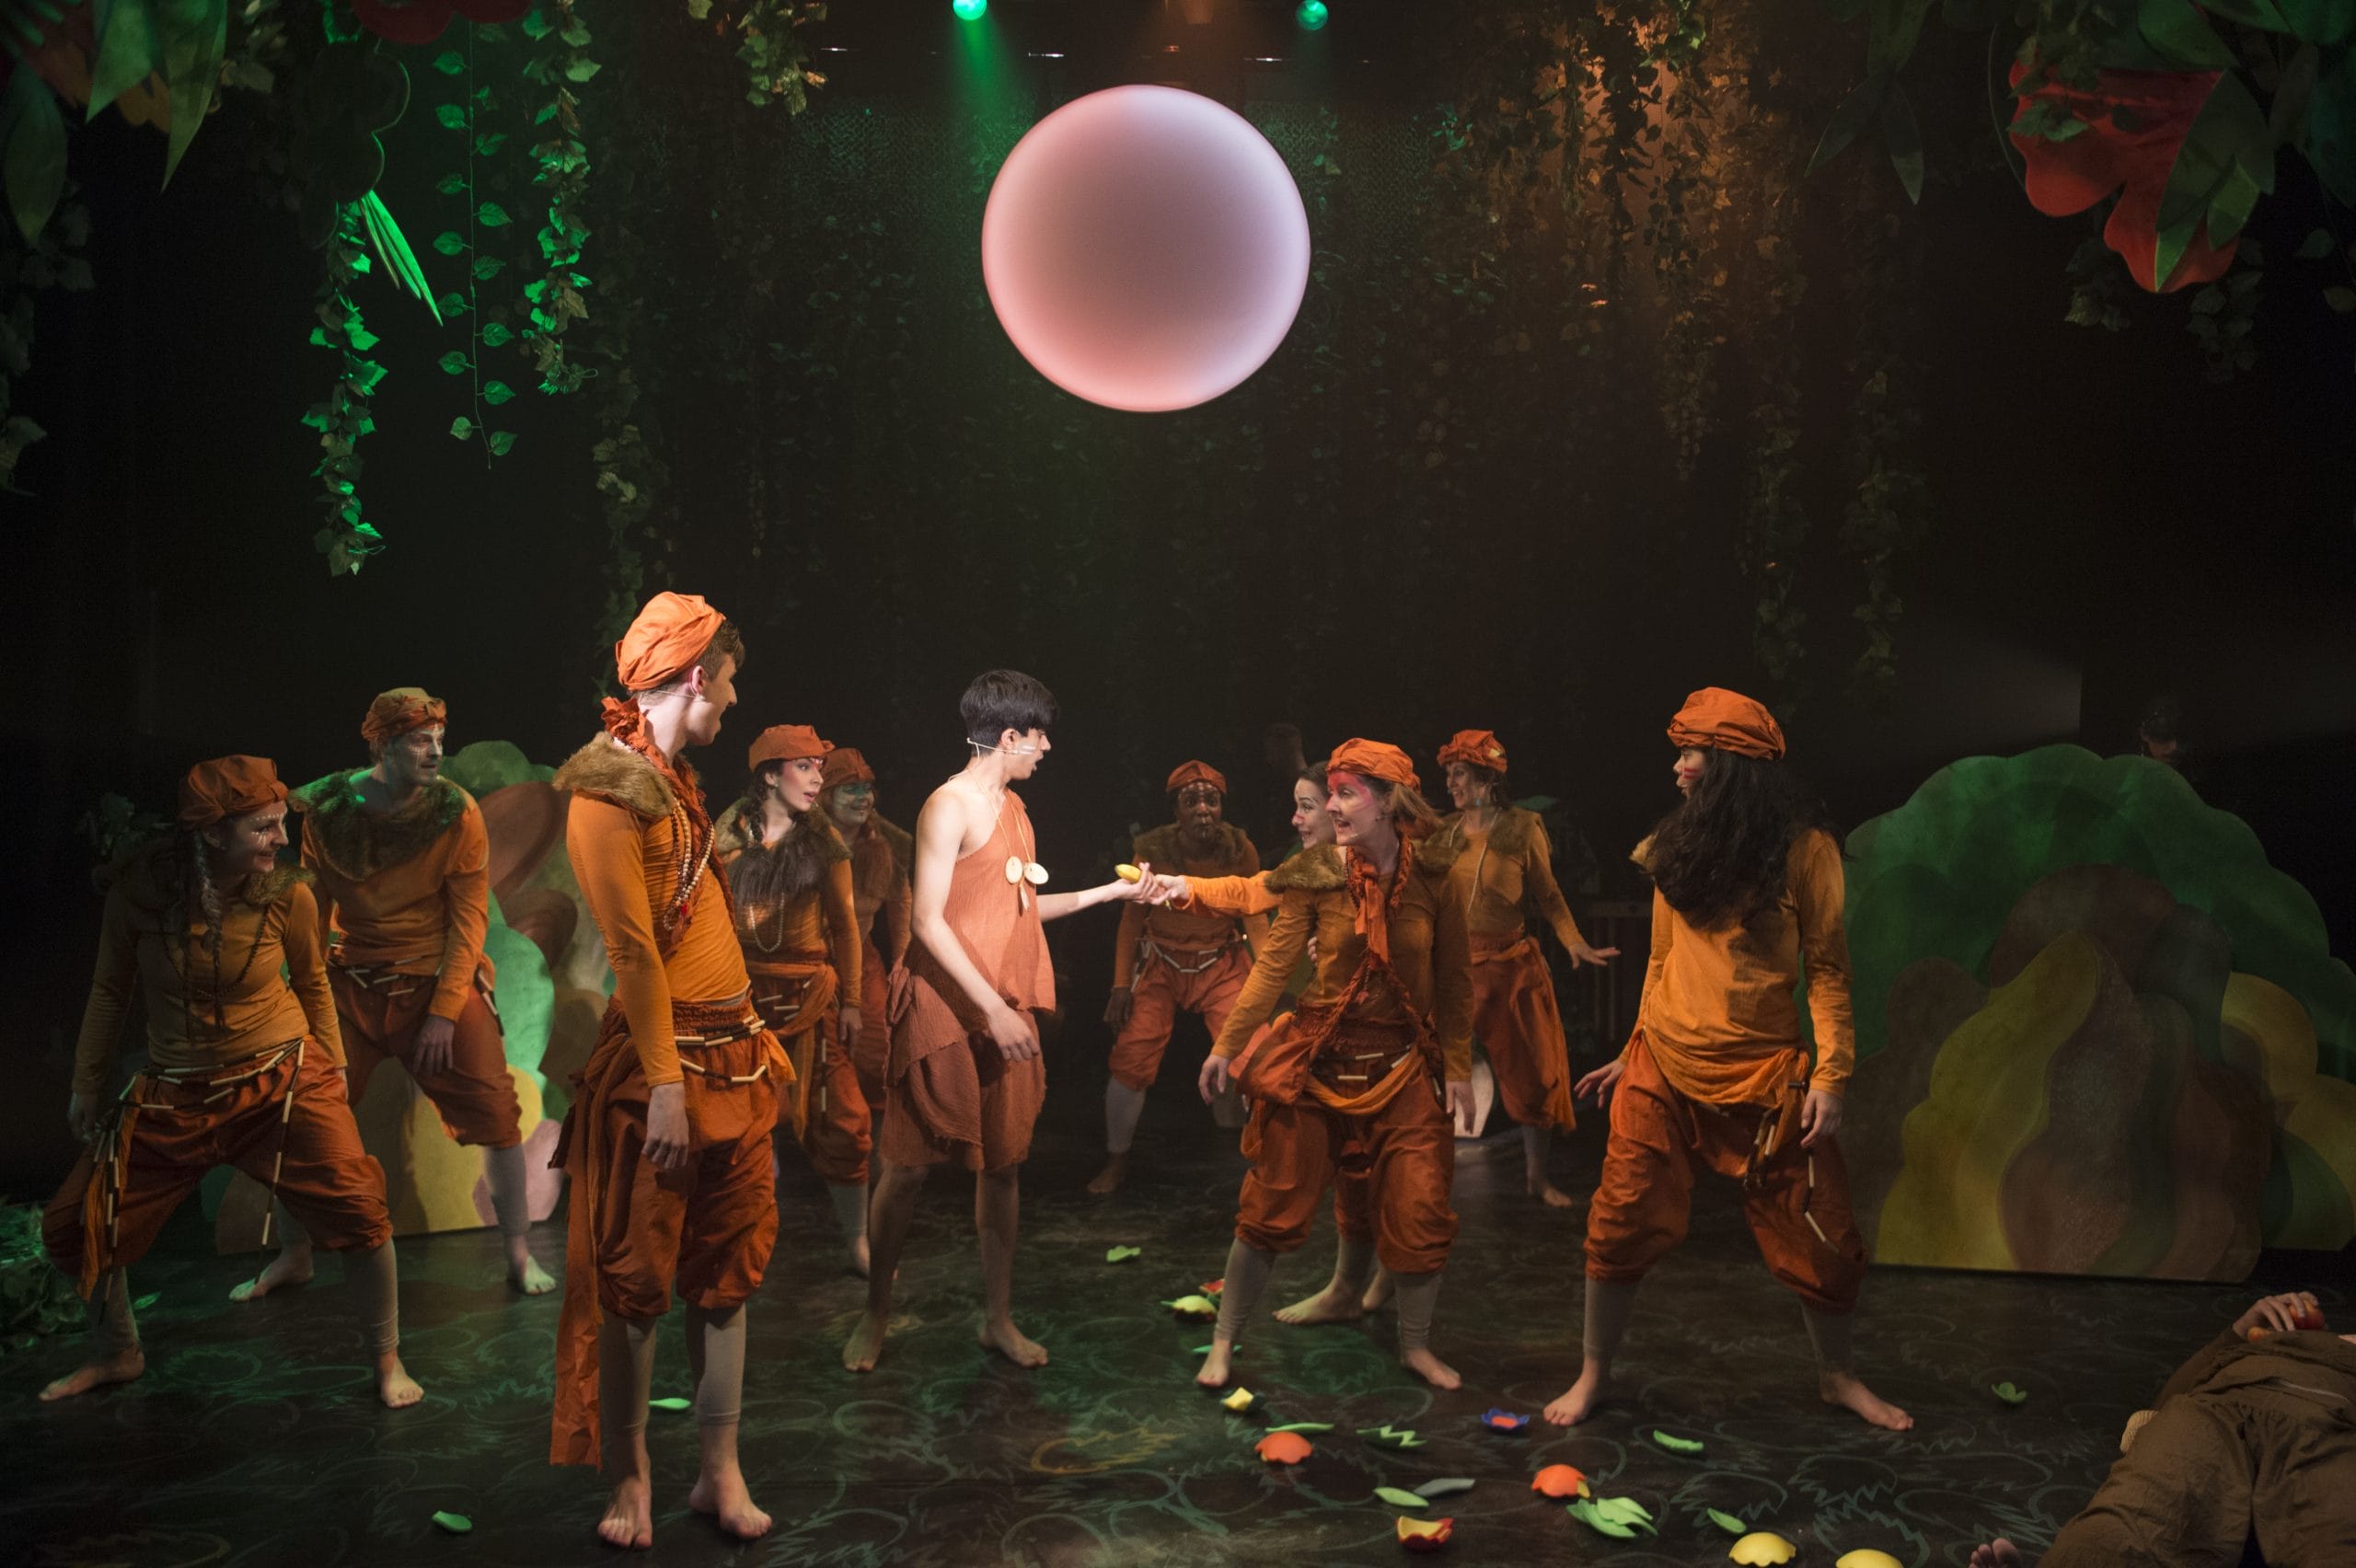 Eleven actors on stage in orange costumes and in a jungle scene, with the moon overhead.